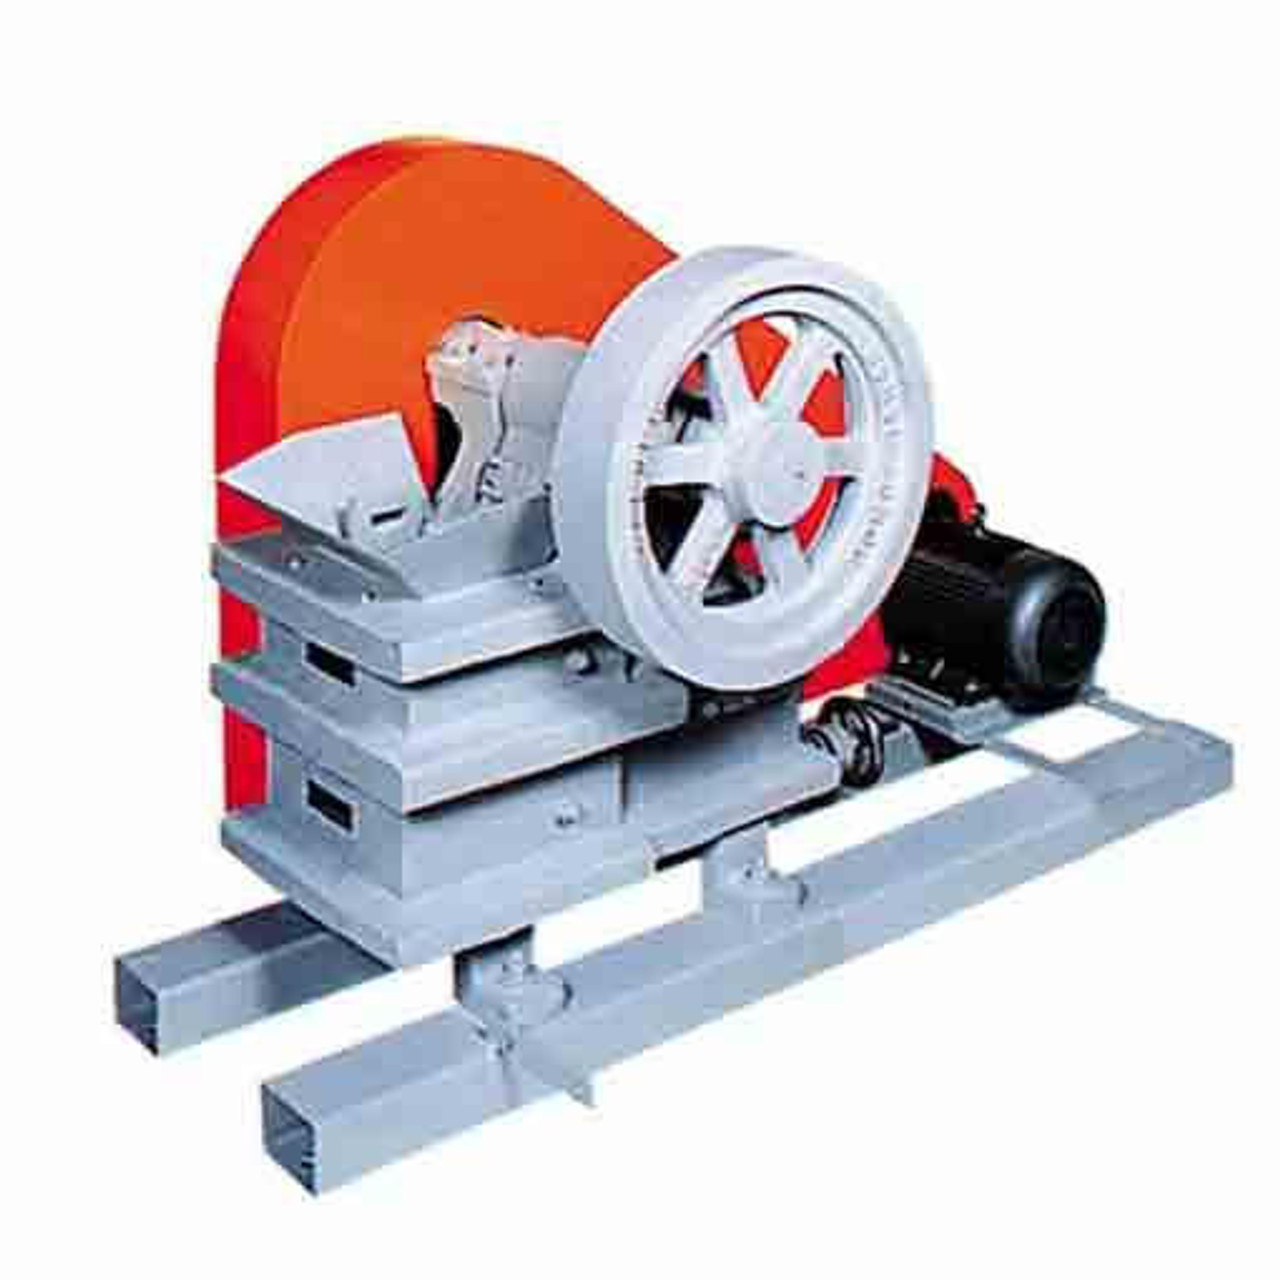 A compact jaw crusher with a small size and lightweight design